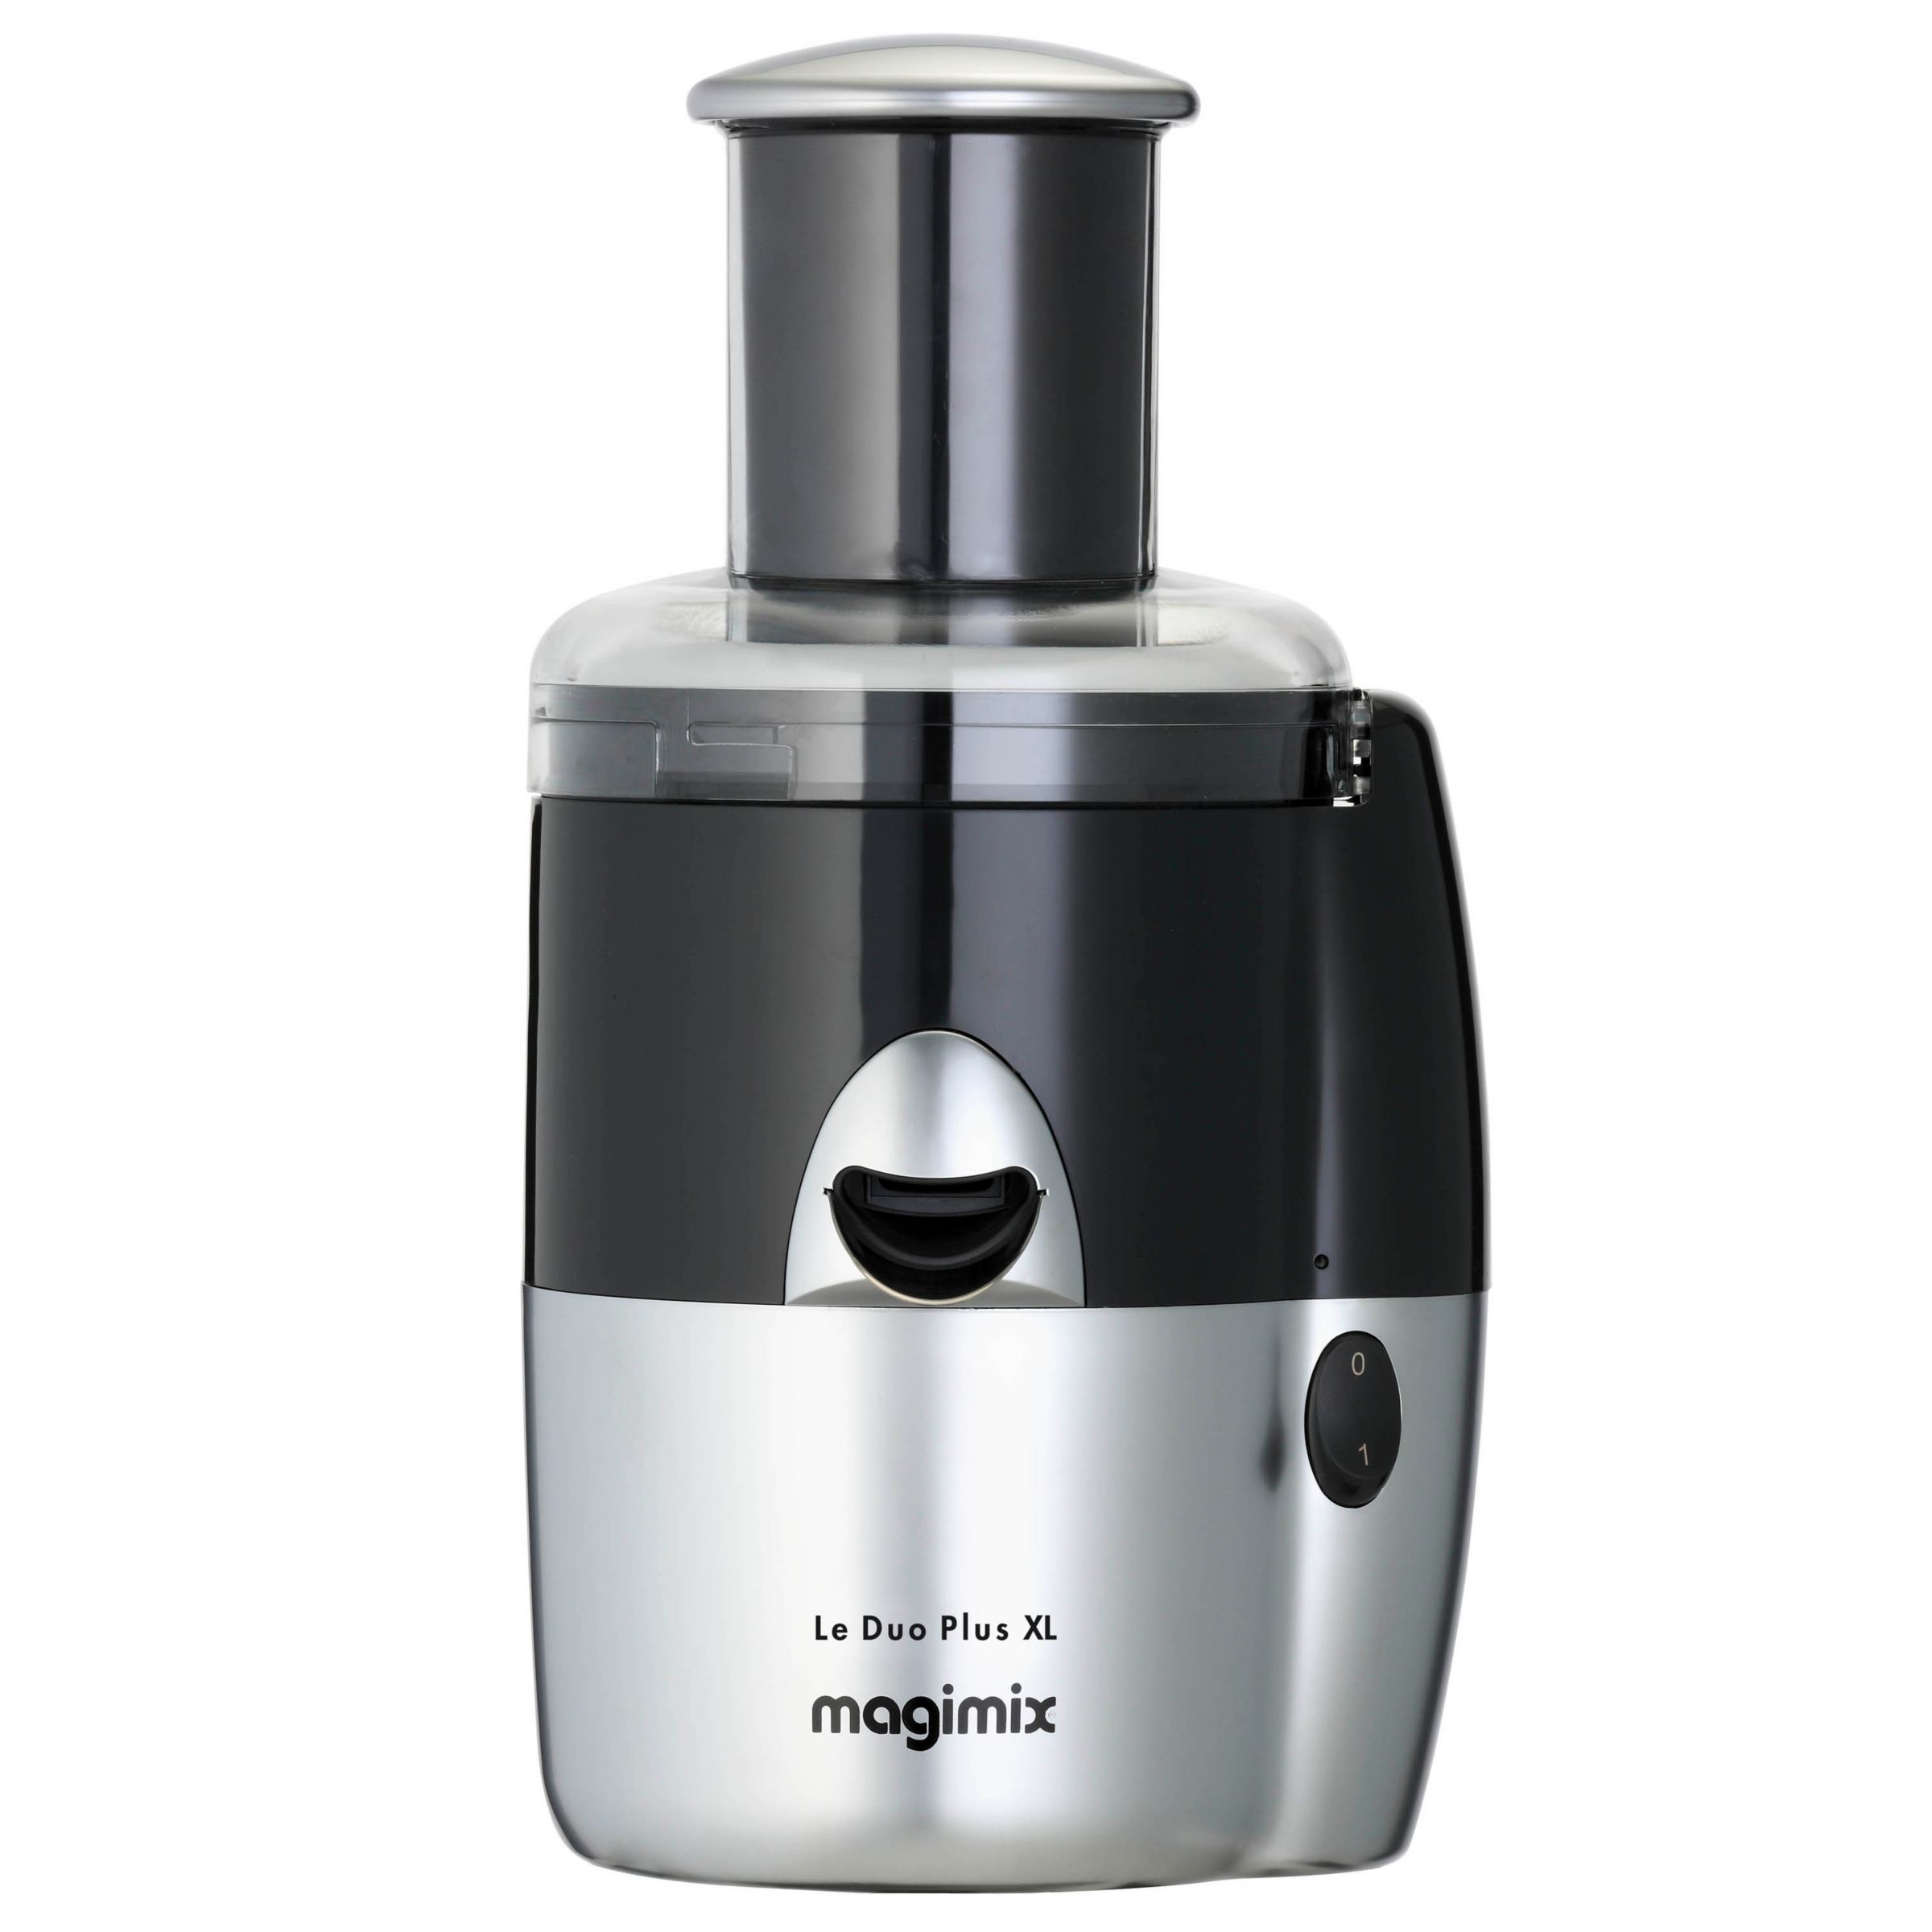 Magimix Le Duo Plus XL Juice Extractor, 14265 at John Lewis